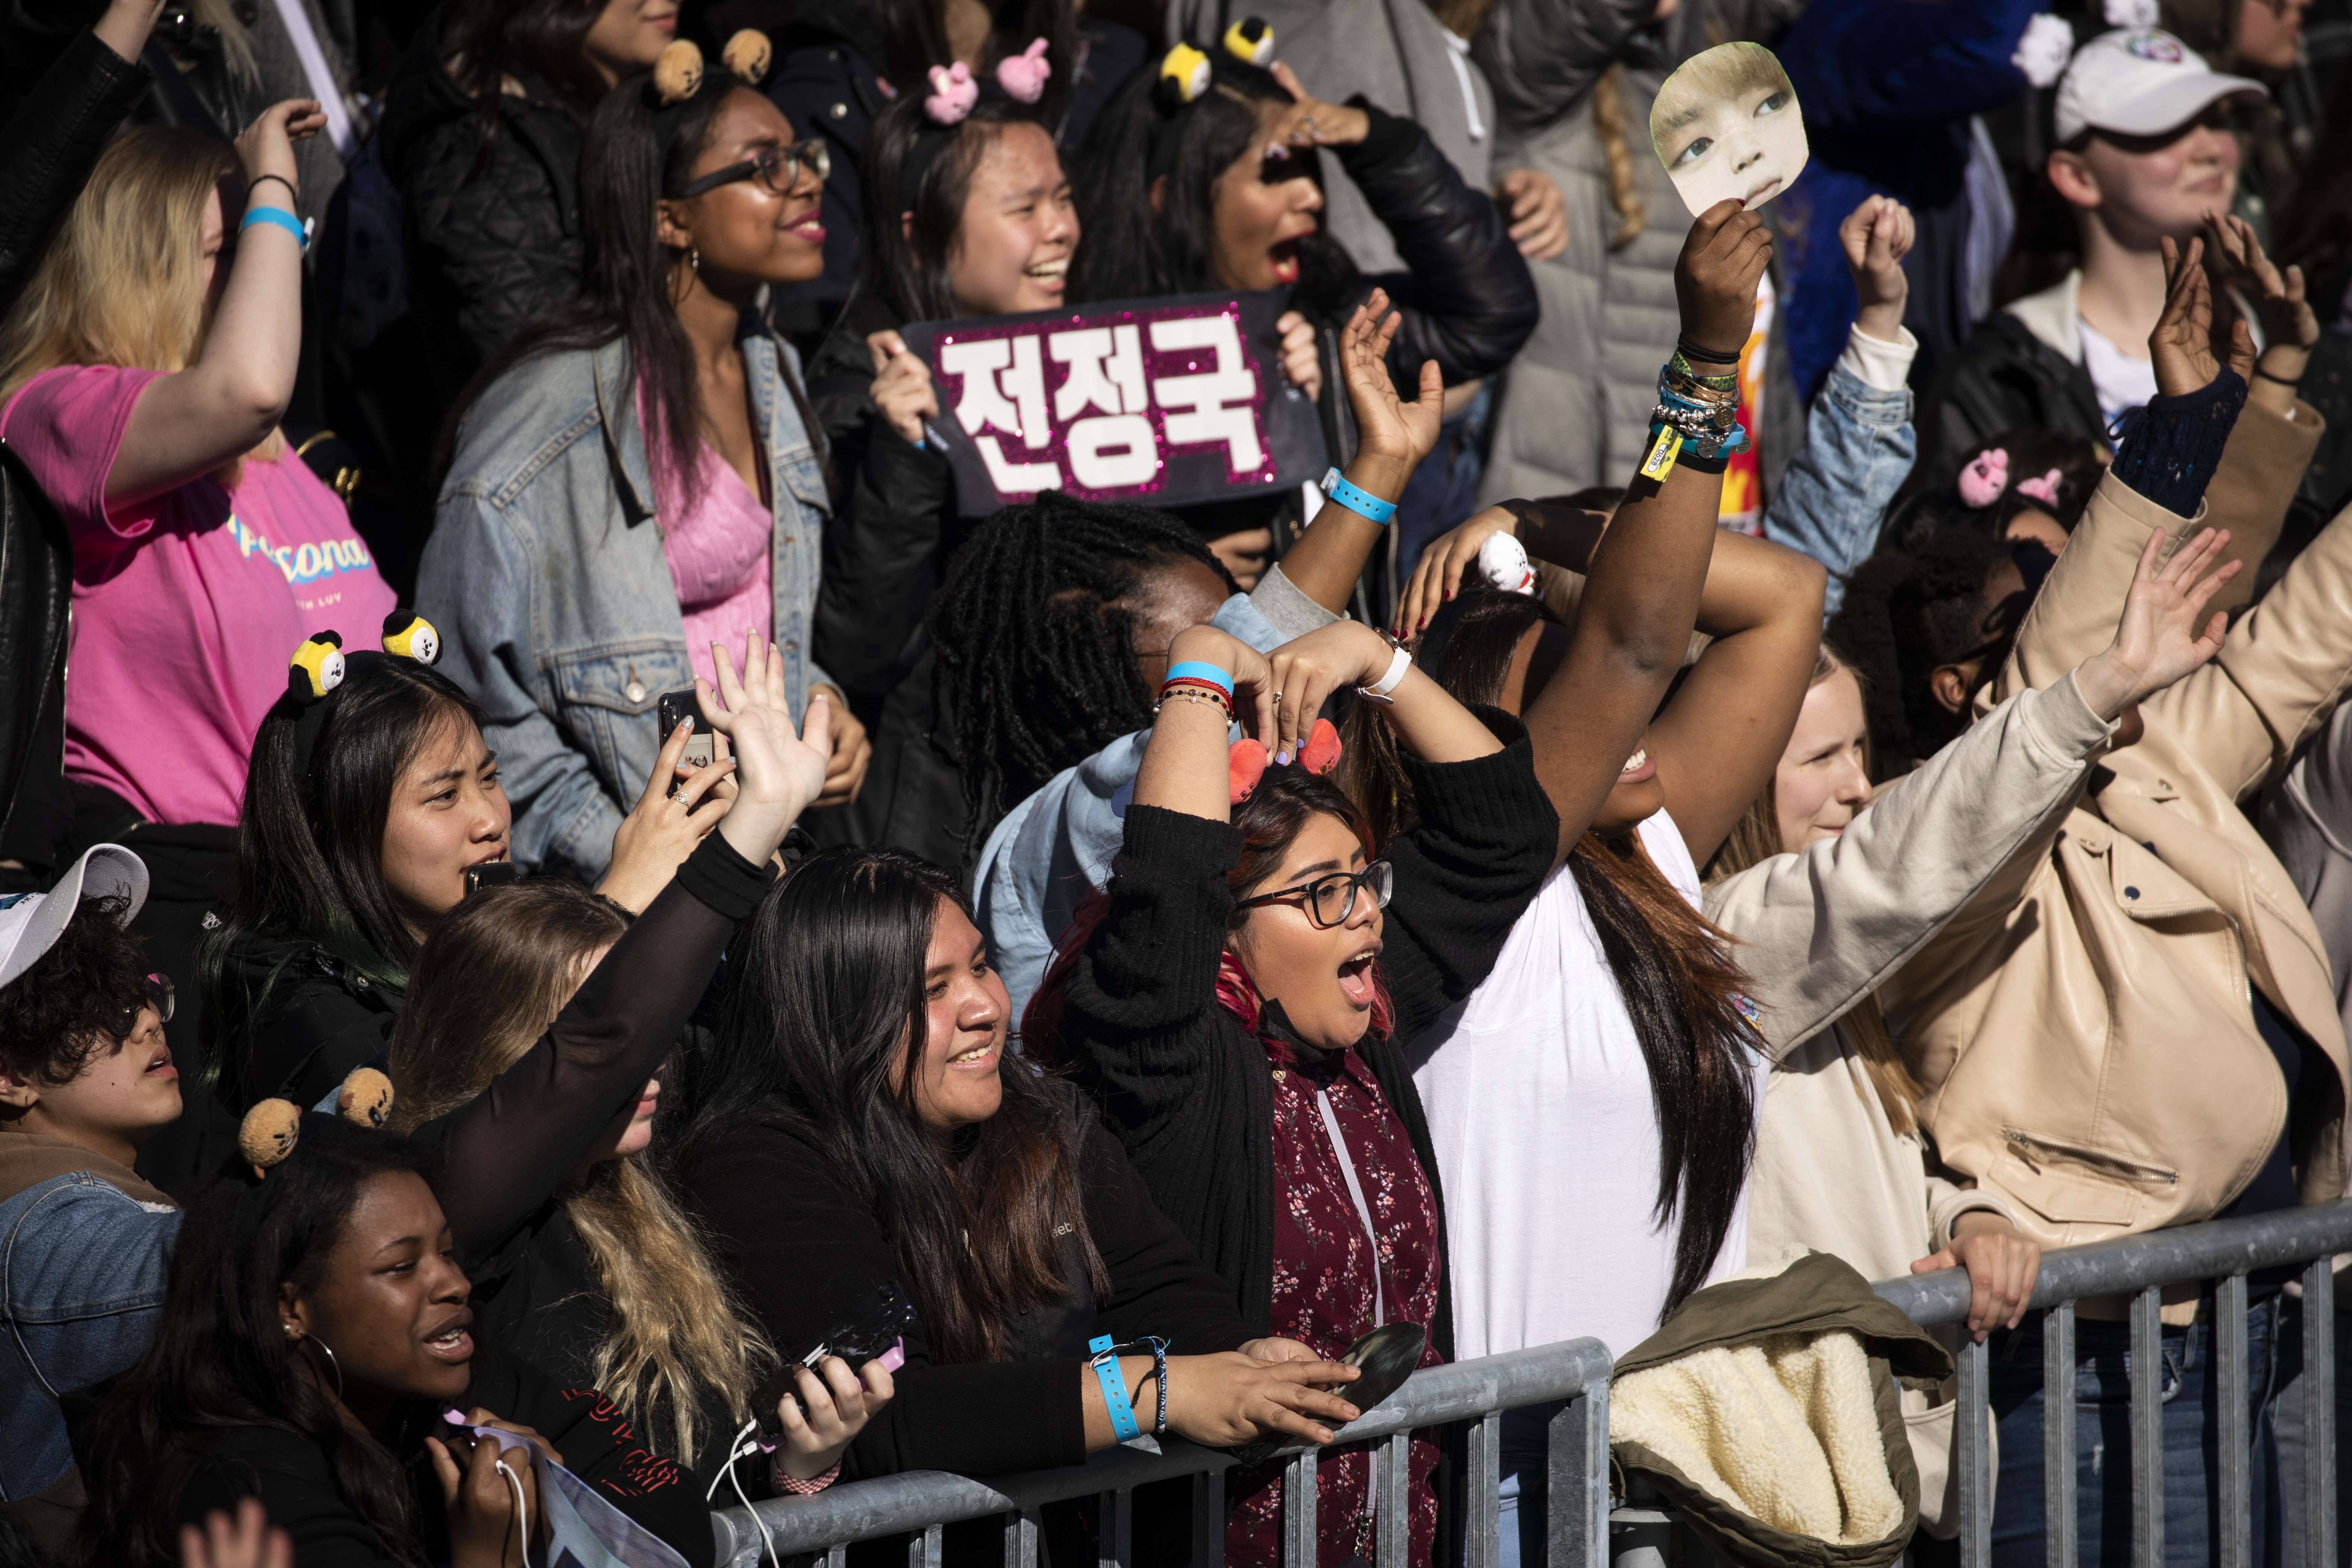 Fans cheer as K-pop group BTS performs in Central Park, New York City, in May 2019. Photo: AFP